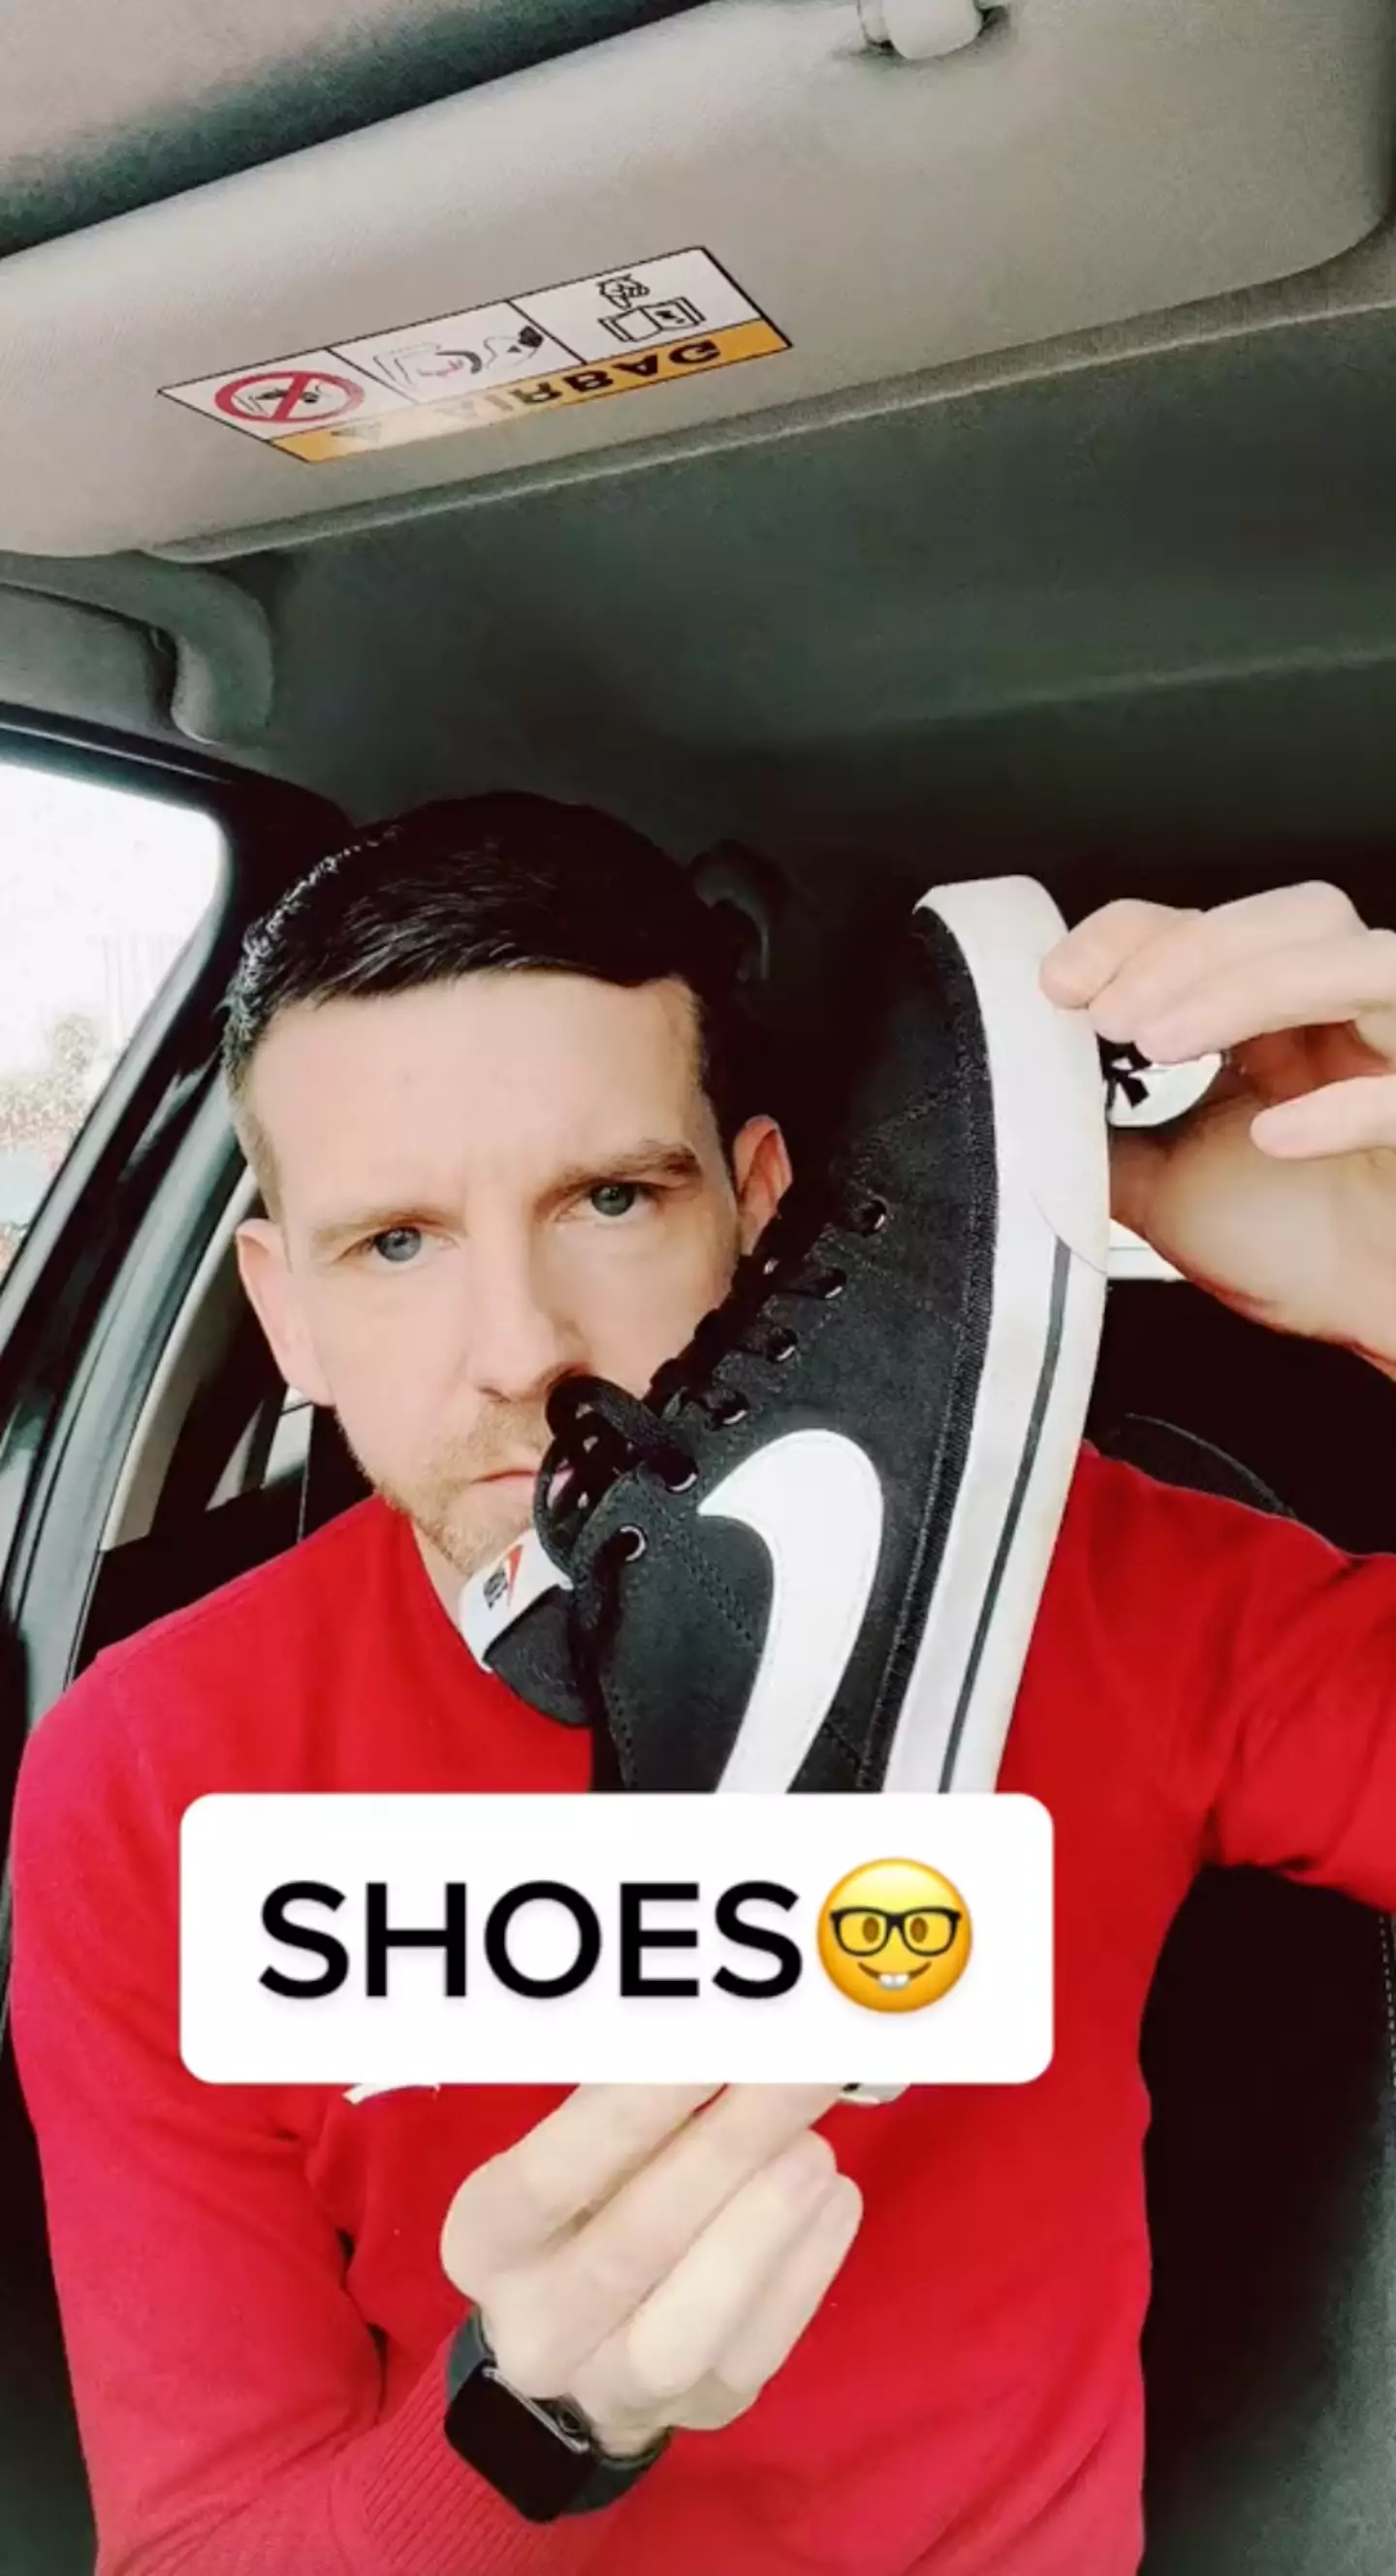 Driver instructor shared the type of shoe for motorists to avoid.